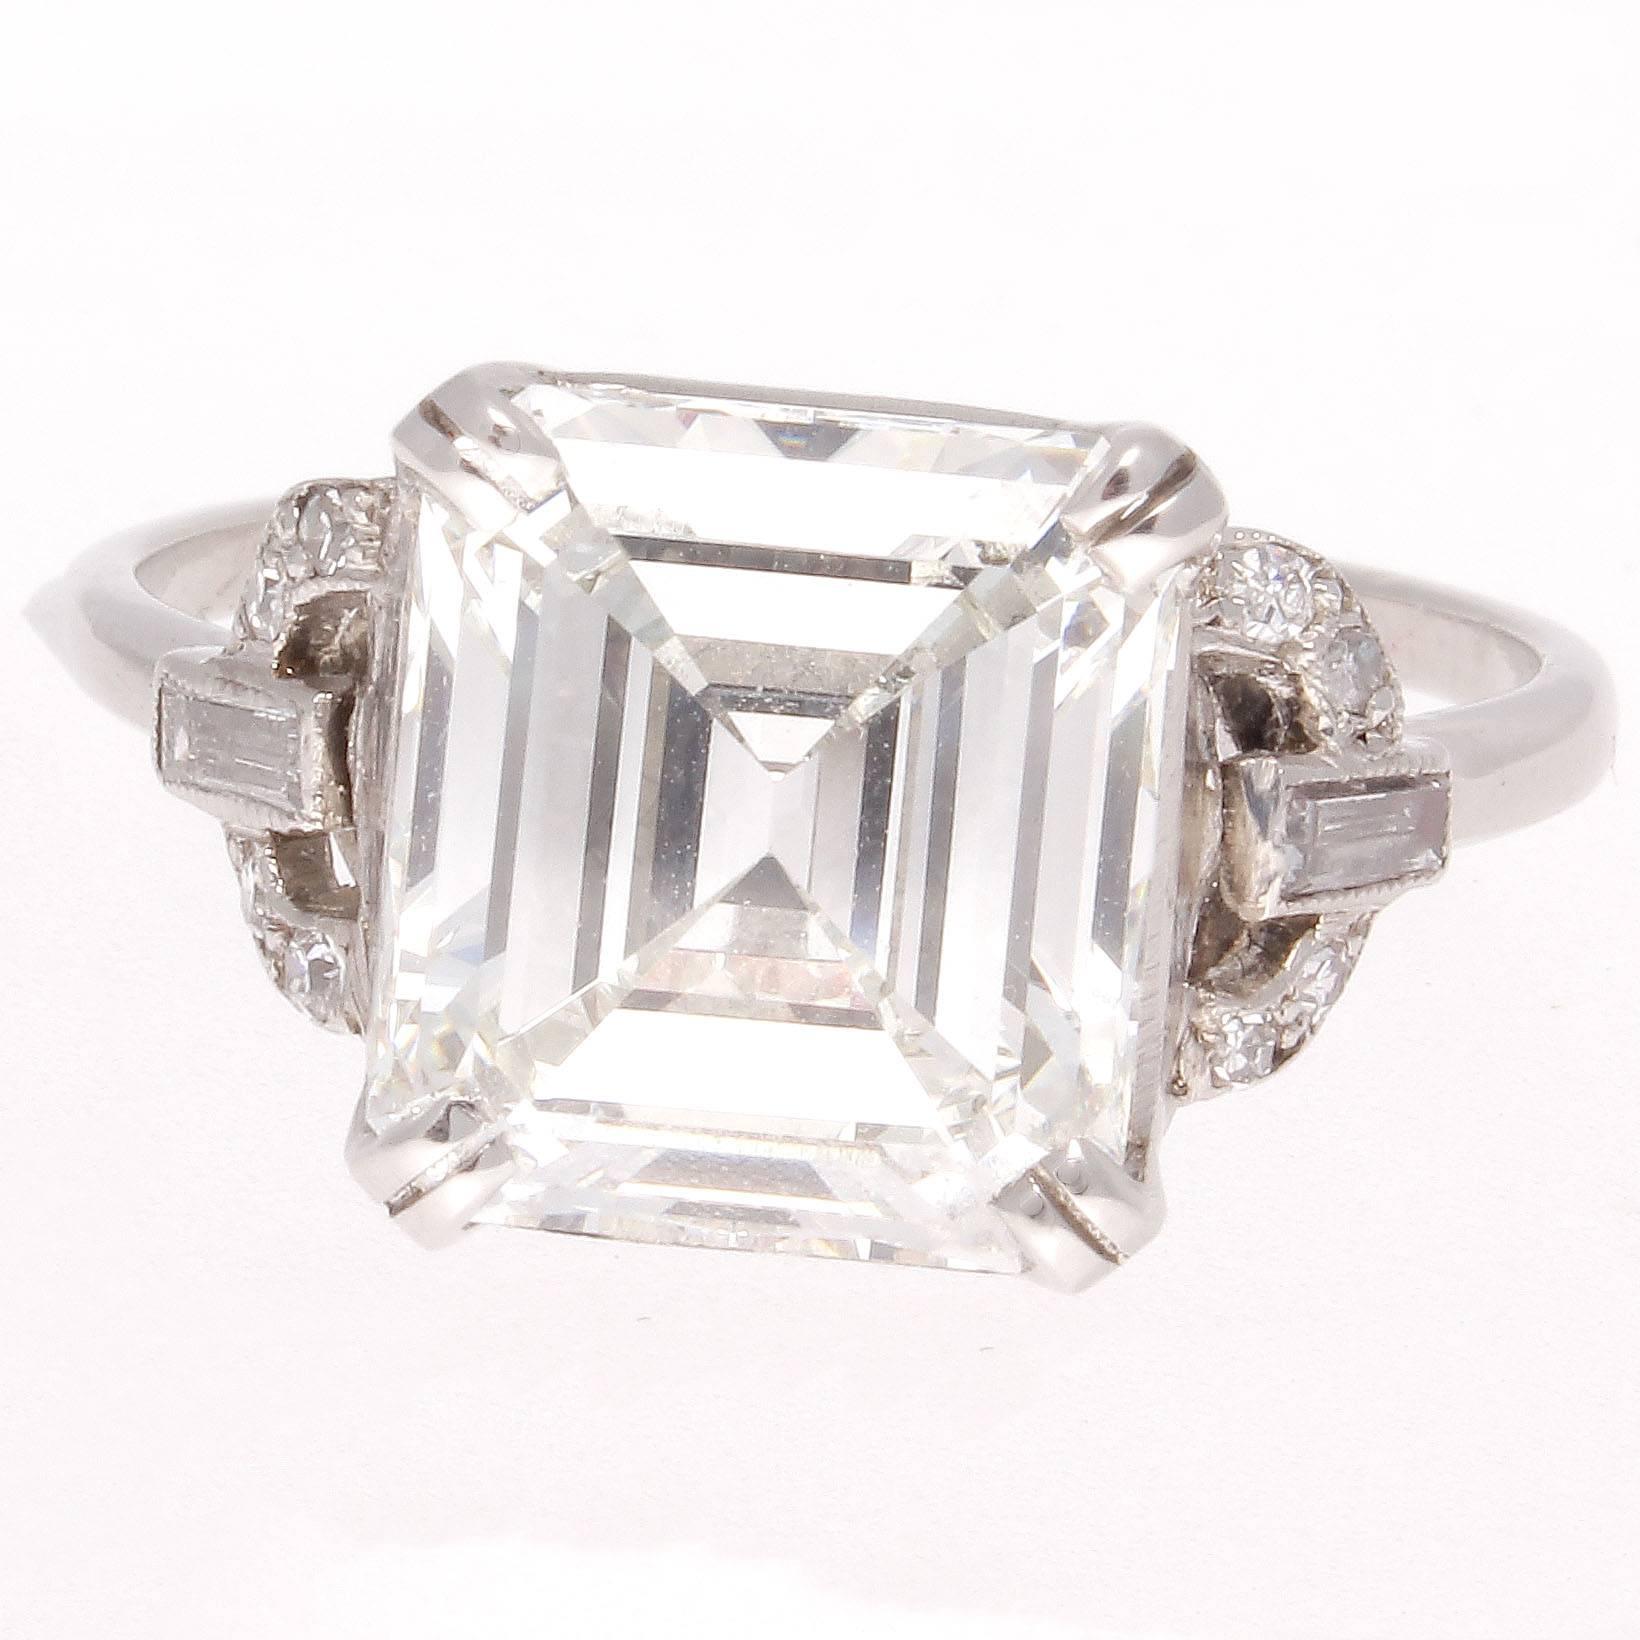 From the elegant Art Deco time period featuring a 4.12 carat emerald cut diamond that is GIA certified as H color and VVS2 clarity. The stone is classically proportioned and extremely bright.  Accented  by colorless diamonds and hand crafted in